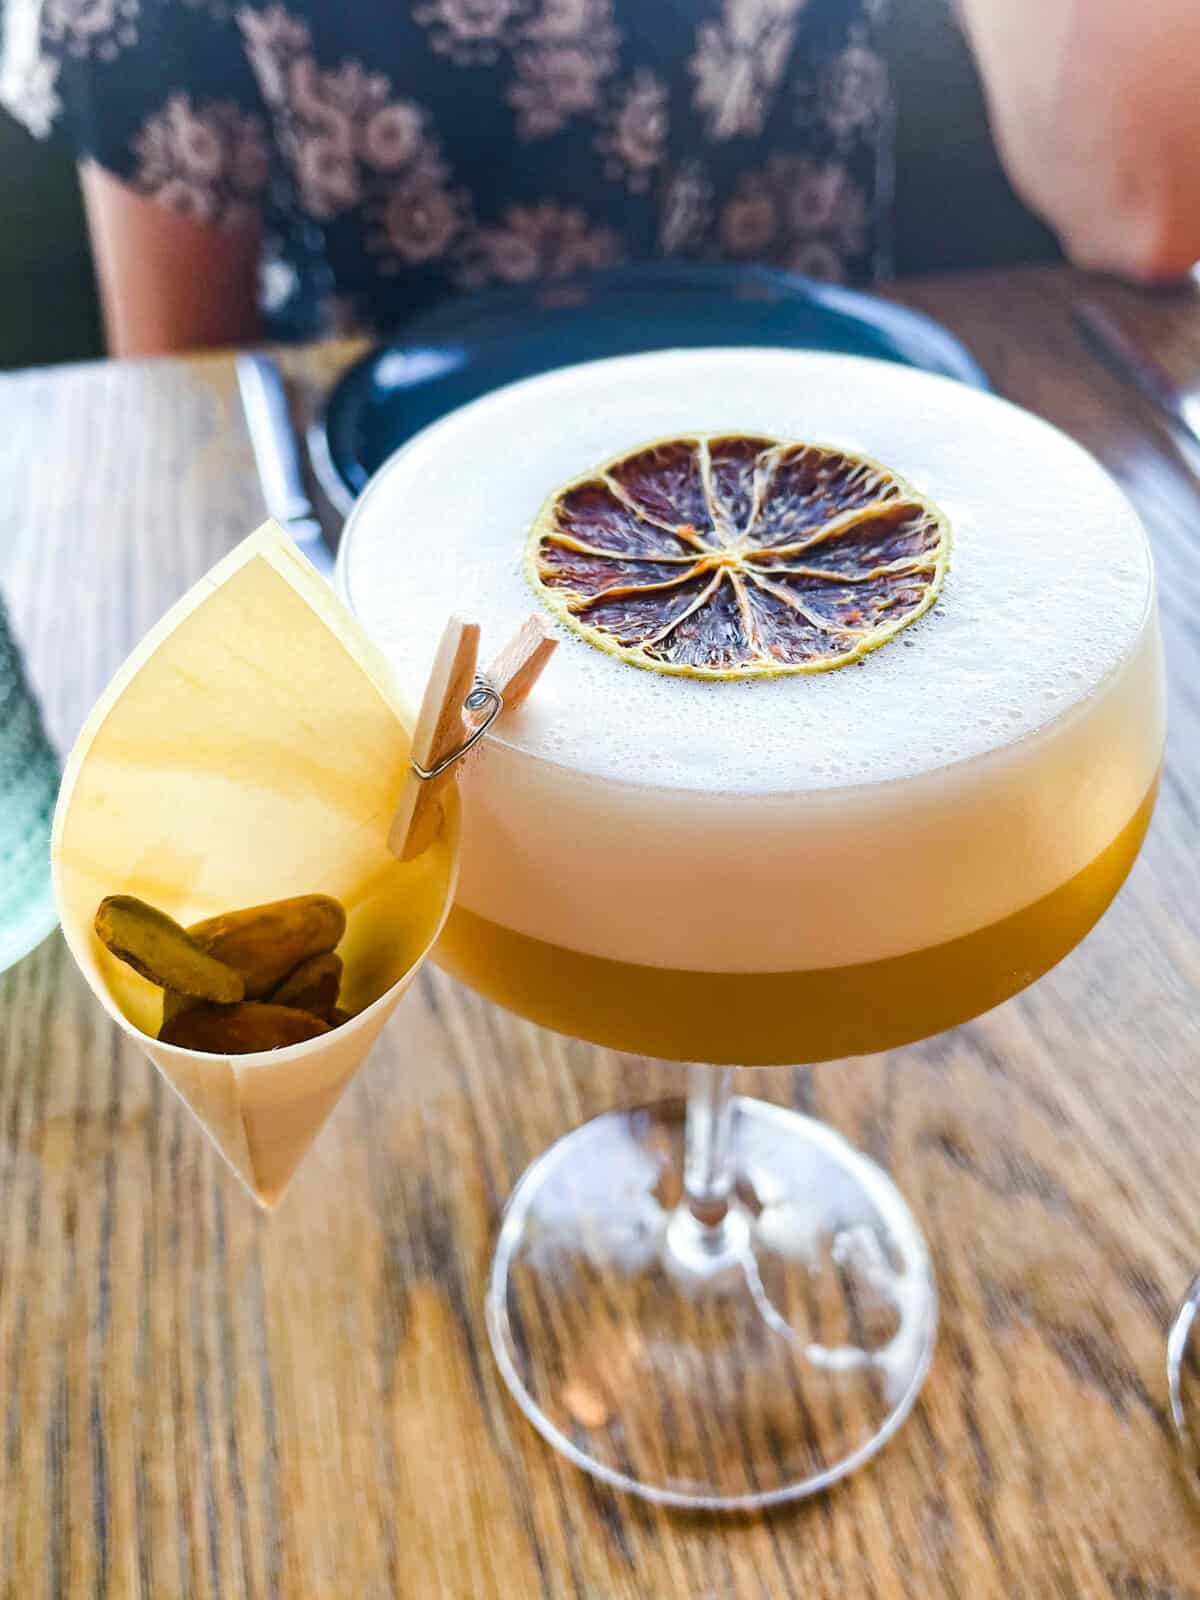 Garnish clipped to a glass with a mini clothespin holding on a small cup with nuts in it.